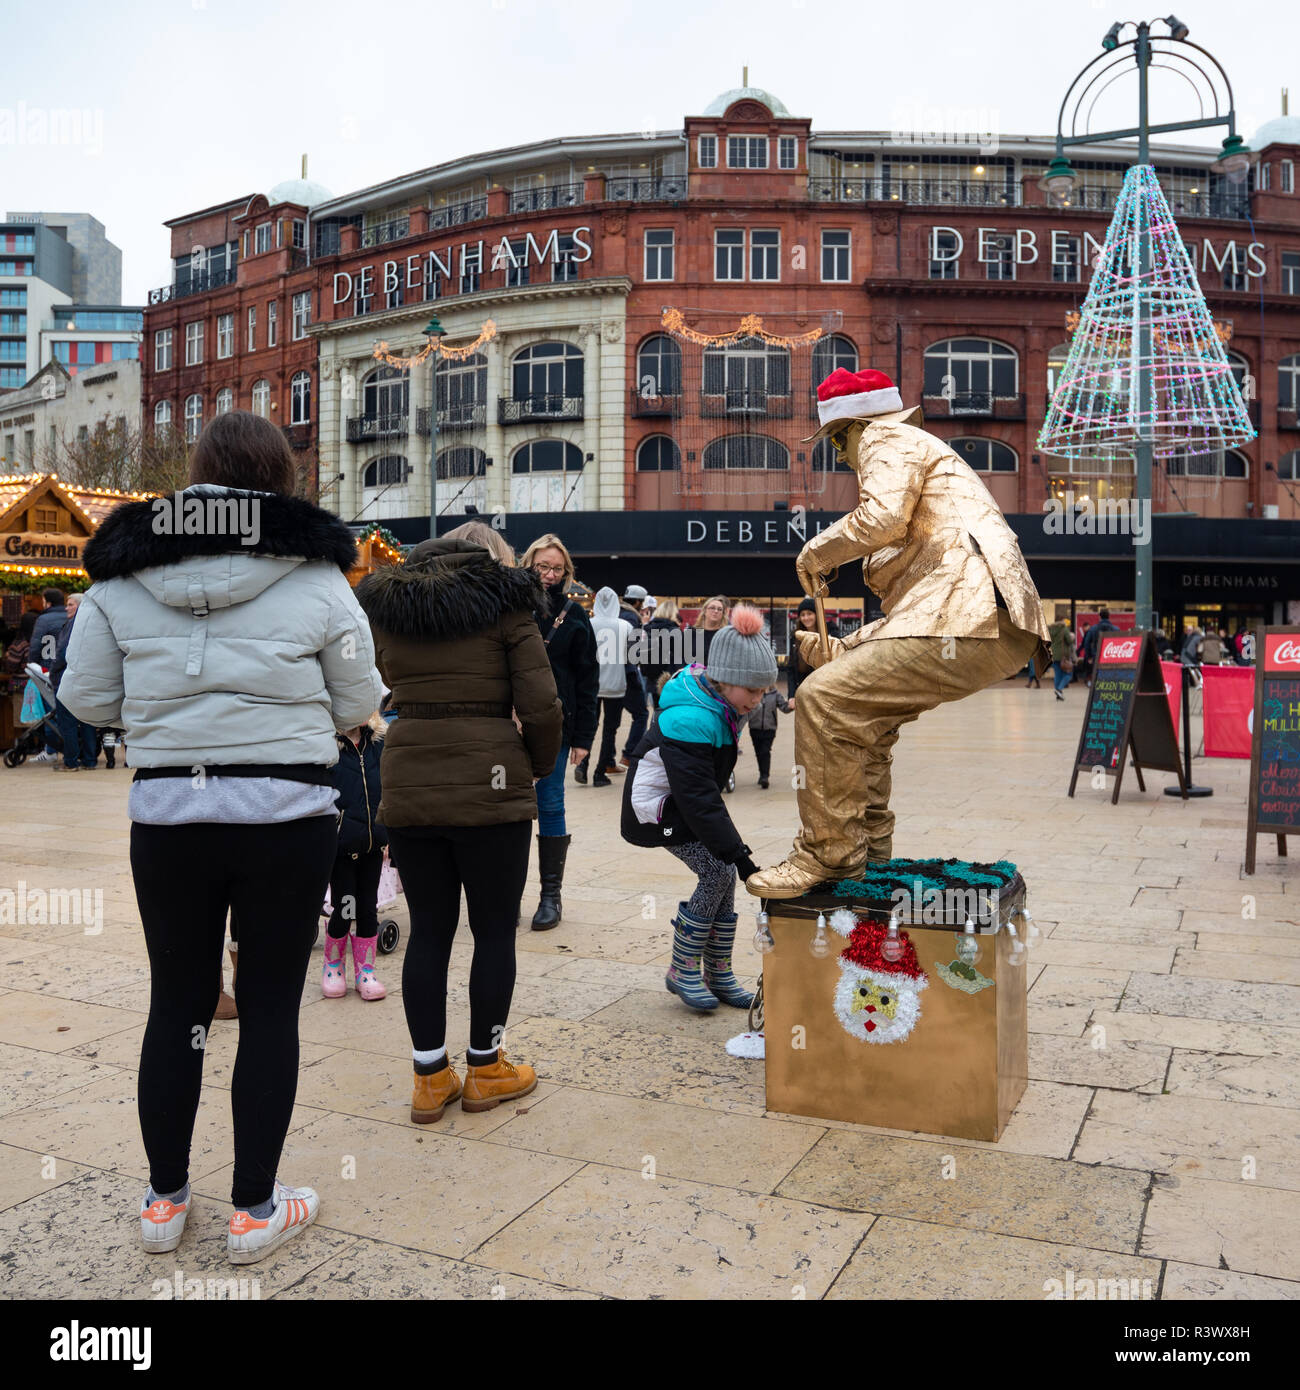 Festive Christmas scene with a gold painted sitting live statue entertaining families in The Square, Bournemouth, Dorset, UK Stock Photo